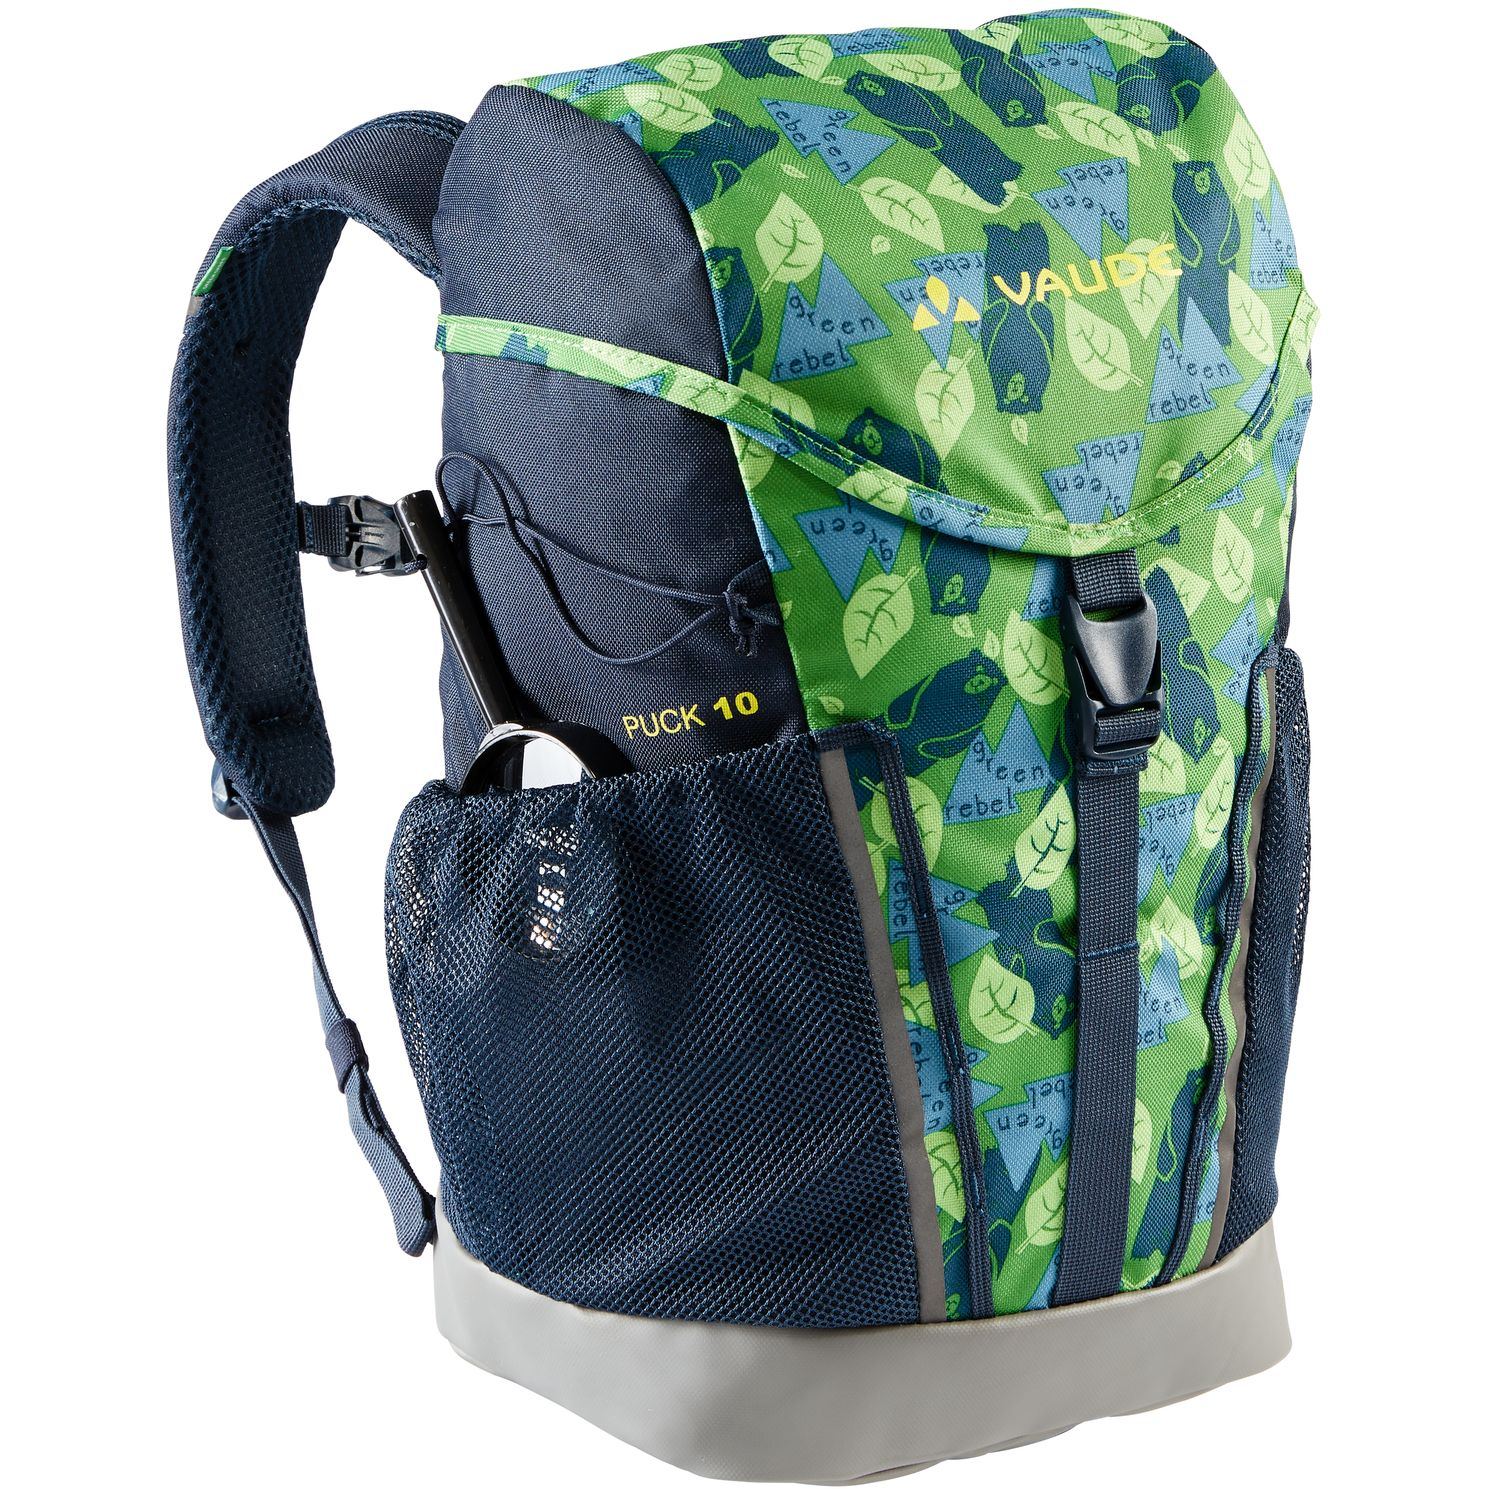 Picture of Vaude Puck 10 Kids Backpack - parrot green/eclipse